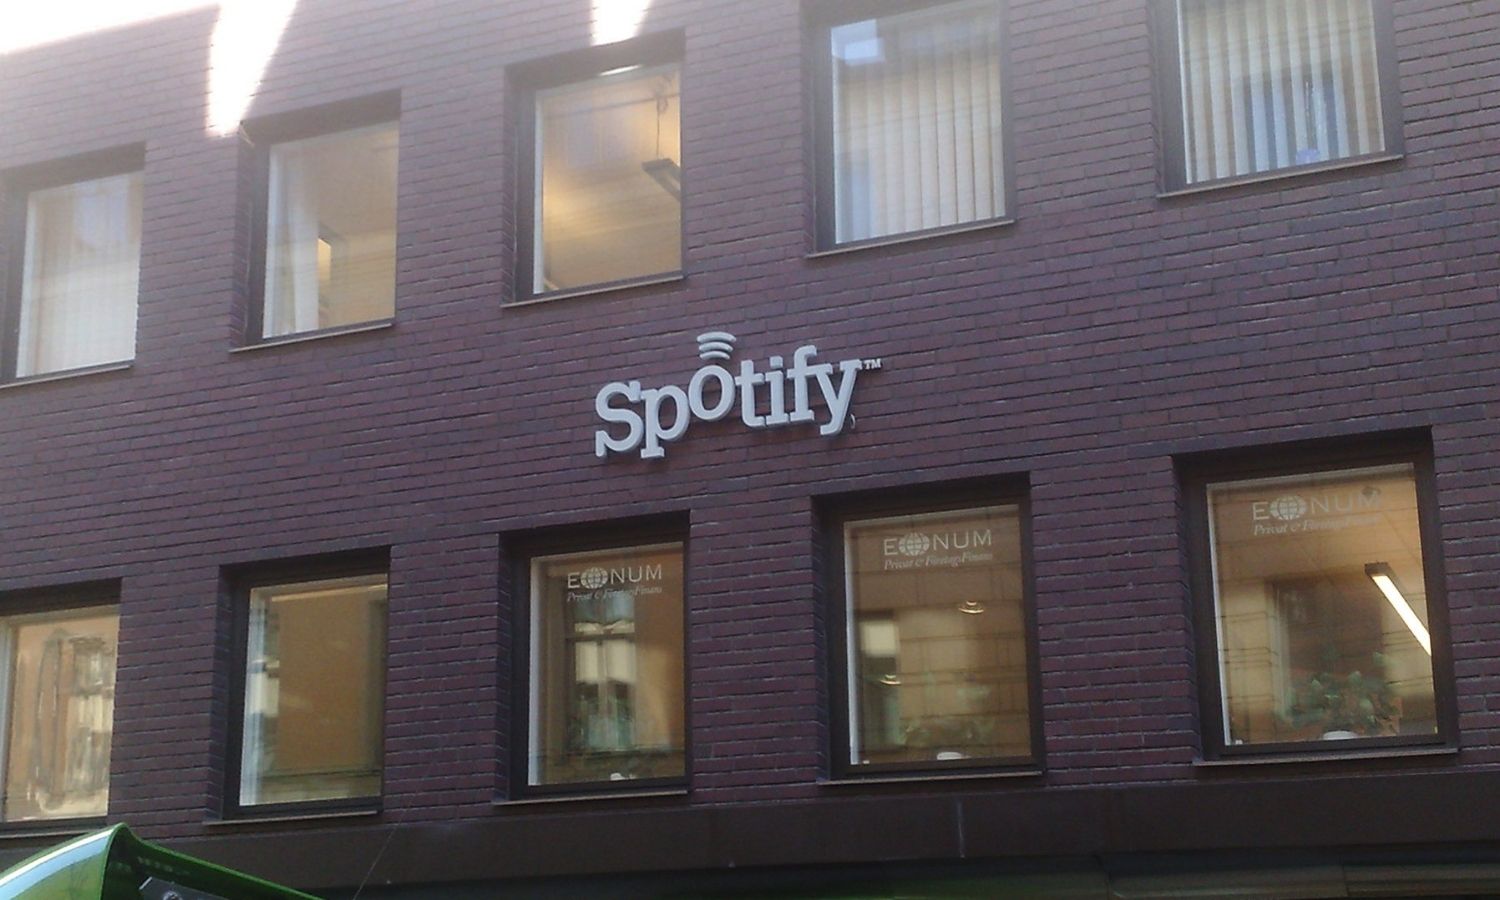 OTD in 2008: Swedish music streaming service Spotify was launched by Daniel Ek and Martin Lorentzon.